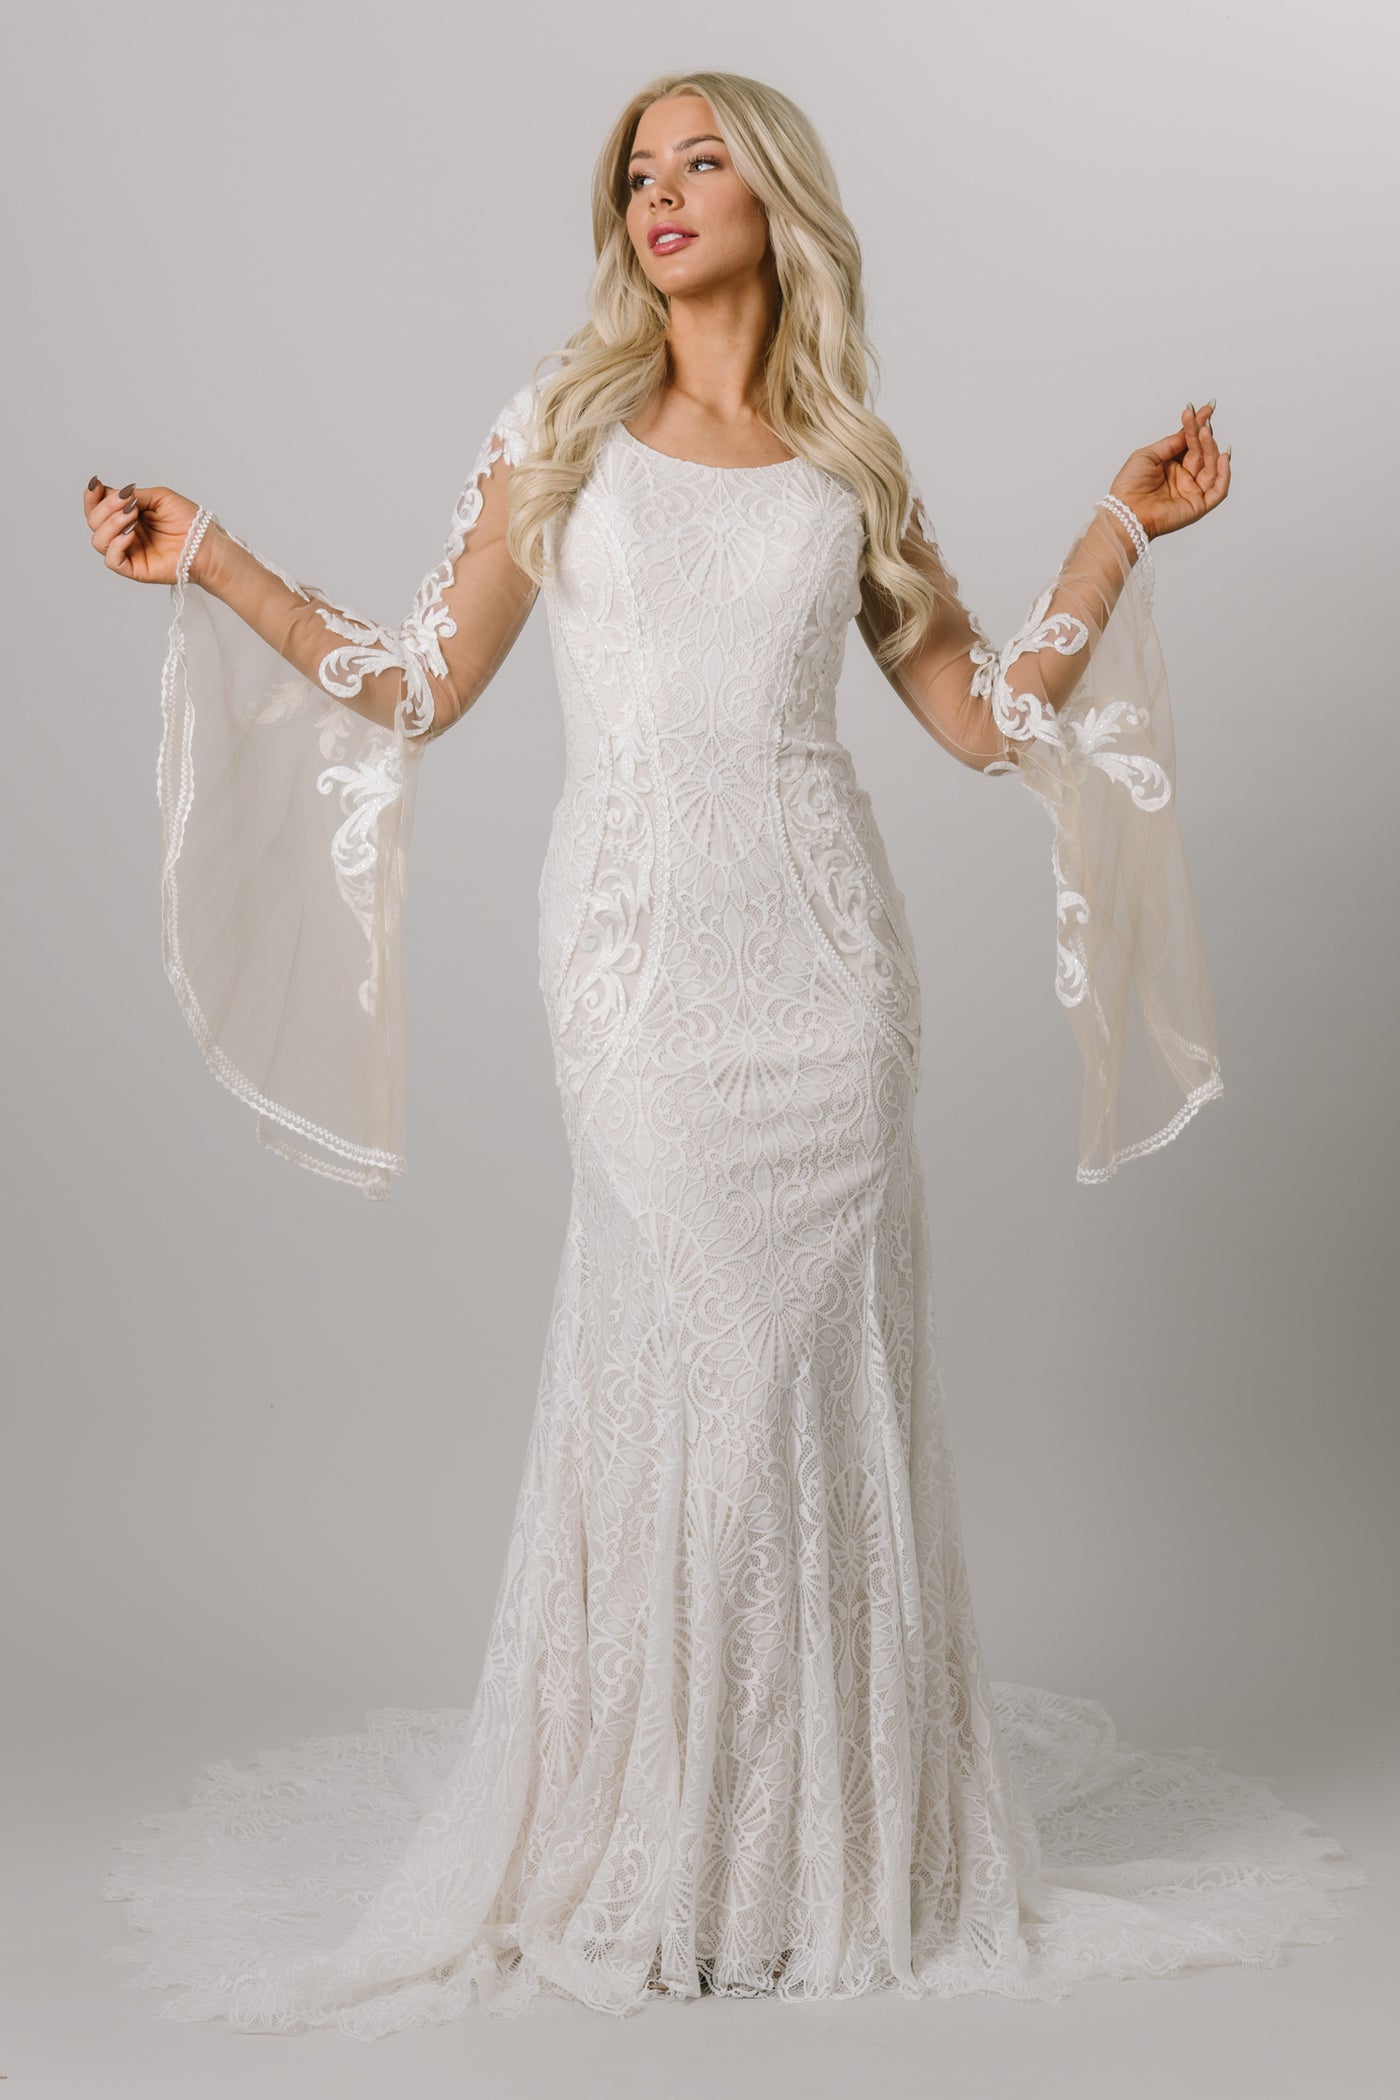 Fitted lace modest wedding dress with bell sleeves. 